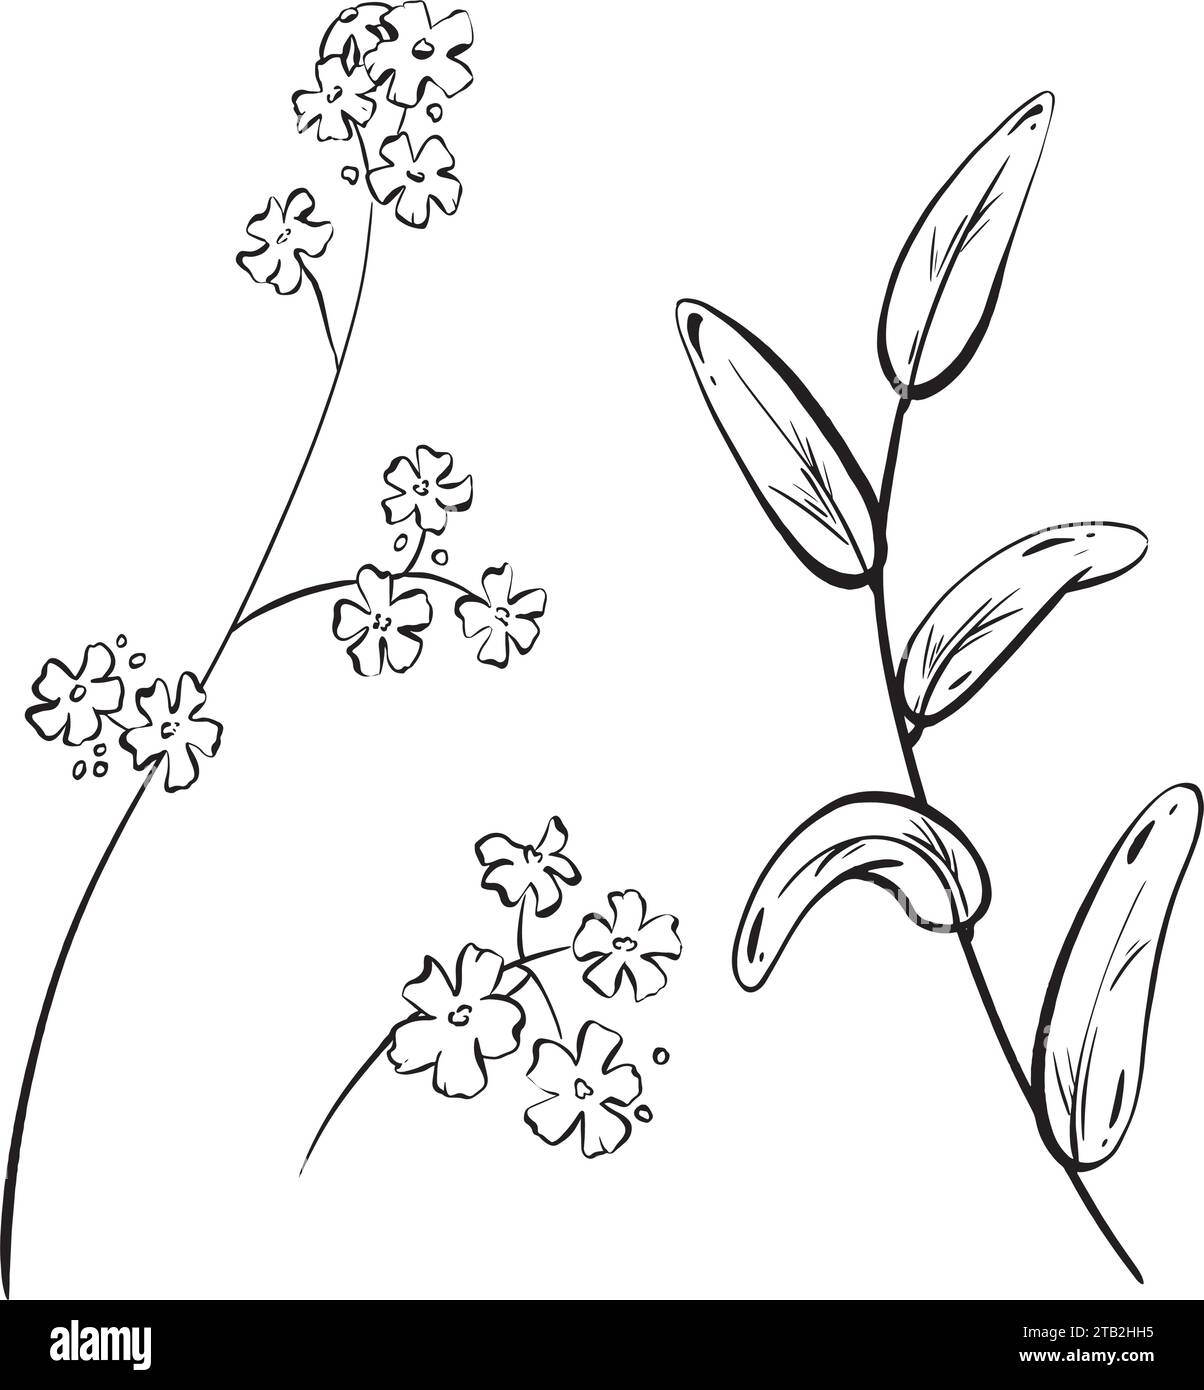 Ink: A collection of wildflowers. Hand-drawn field flowers and buds, along with a branch of forest herbs. Medicinal plants and decorative foliage Stock Vector